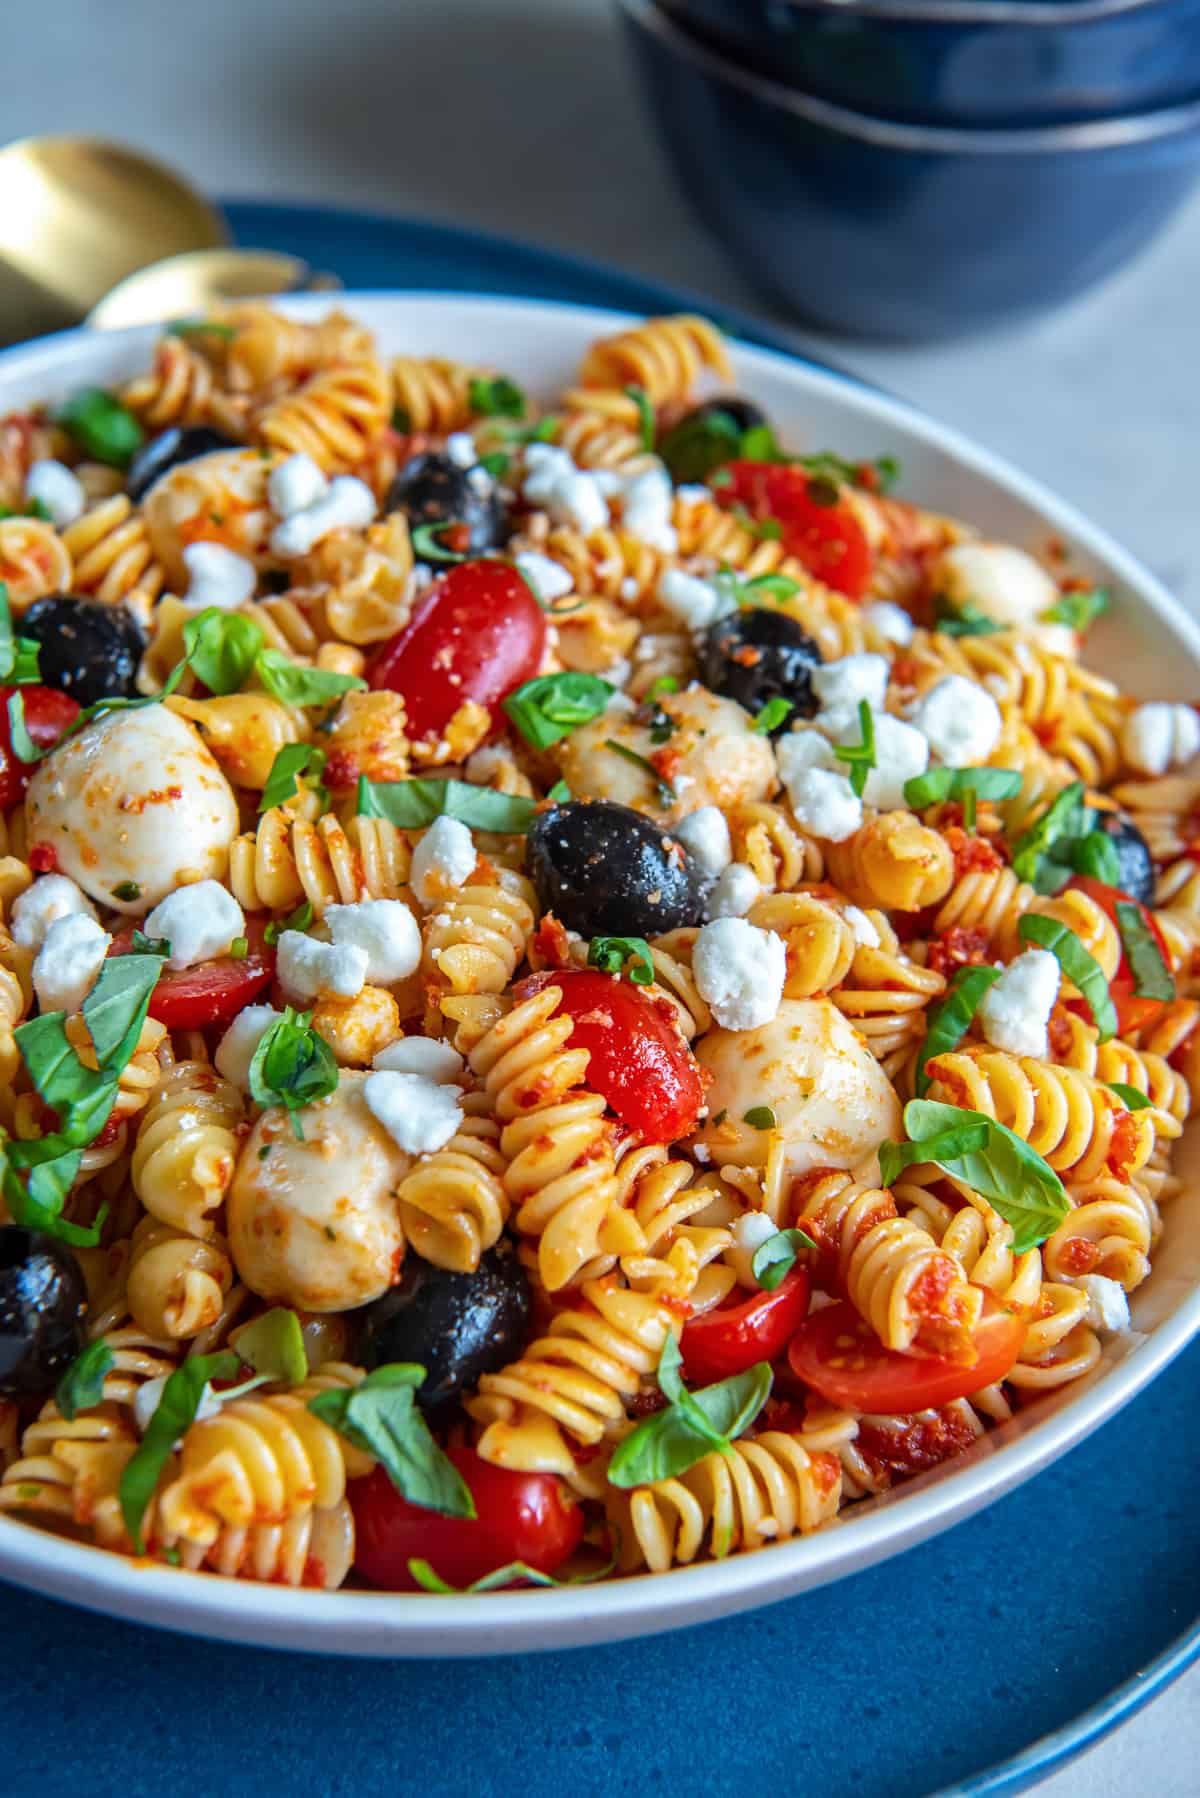 A side view of a large bowl filled with pasta salad with tomatoes, black olives, mozzarella balls, and basil.